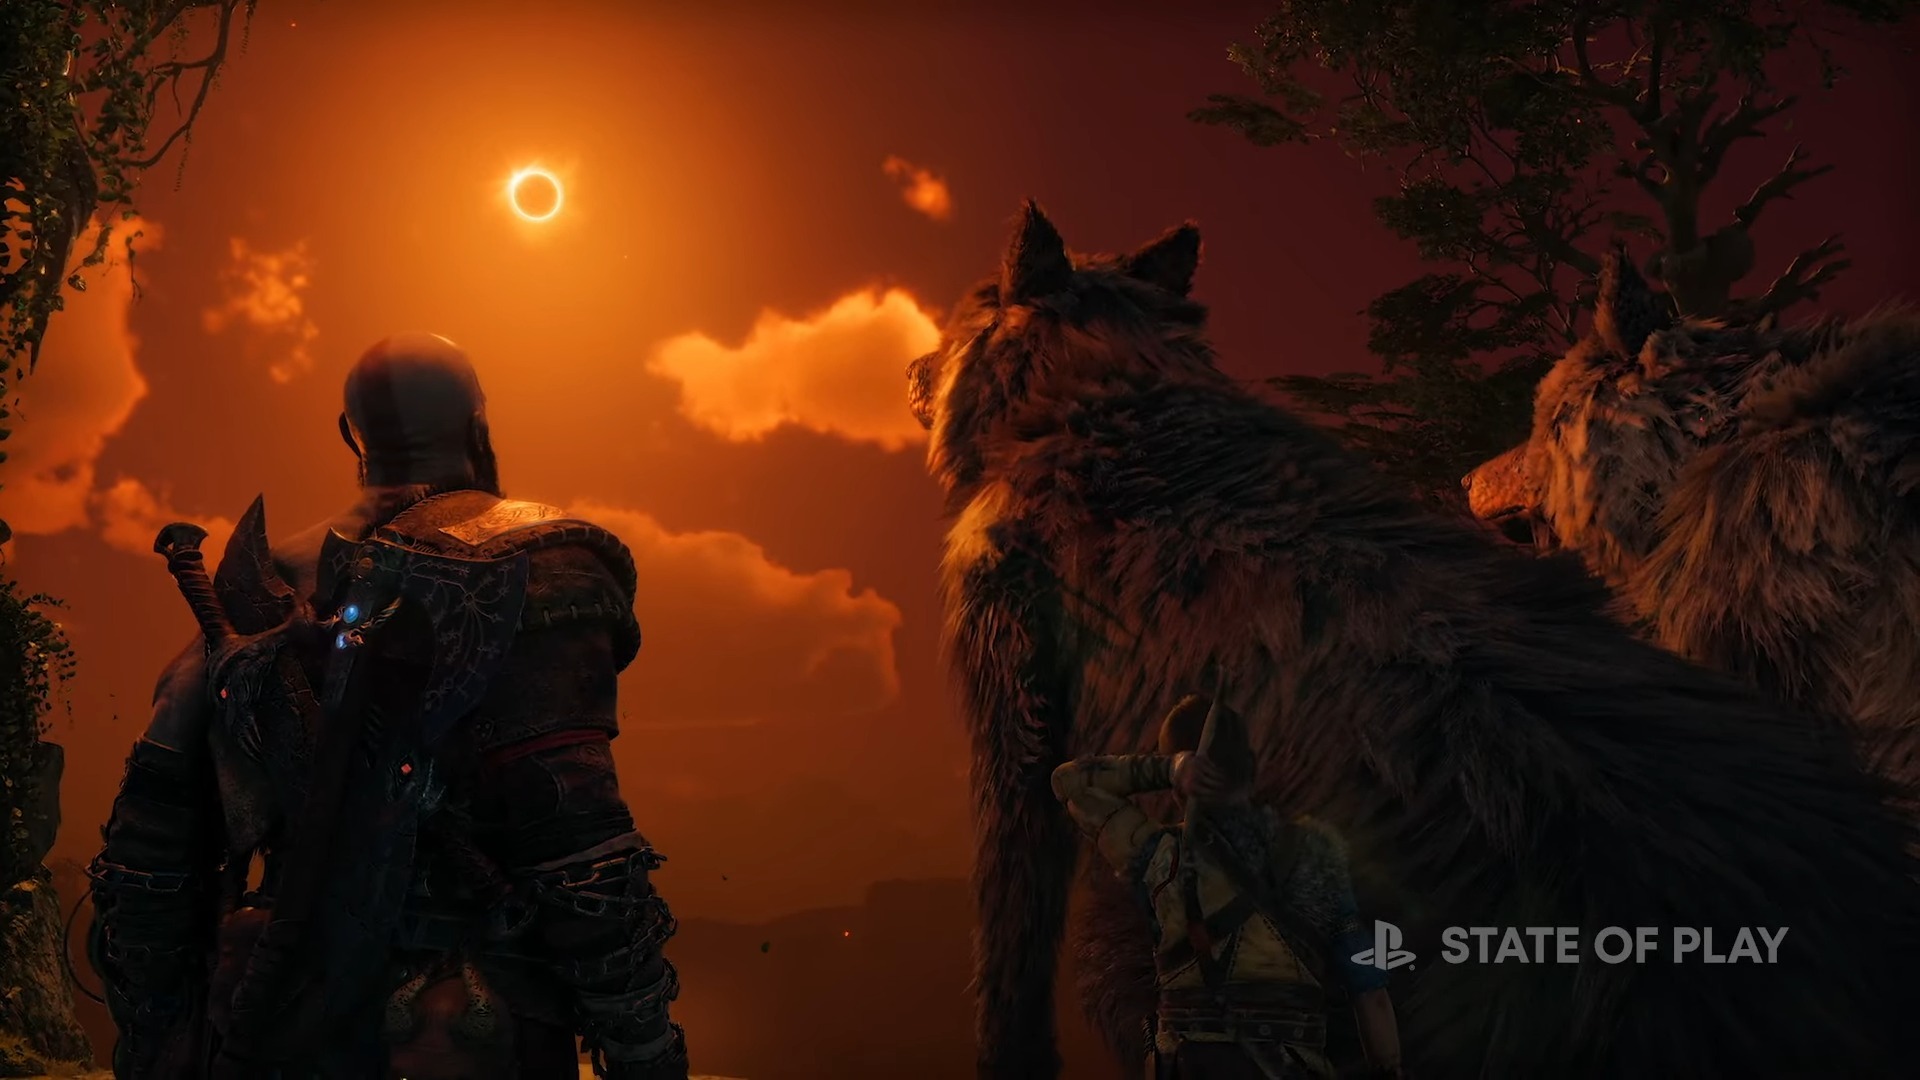 Kratos and Atreus look to a sun with two dire wolves in God of War Ragnarok